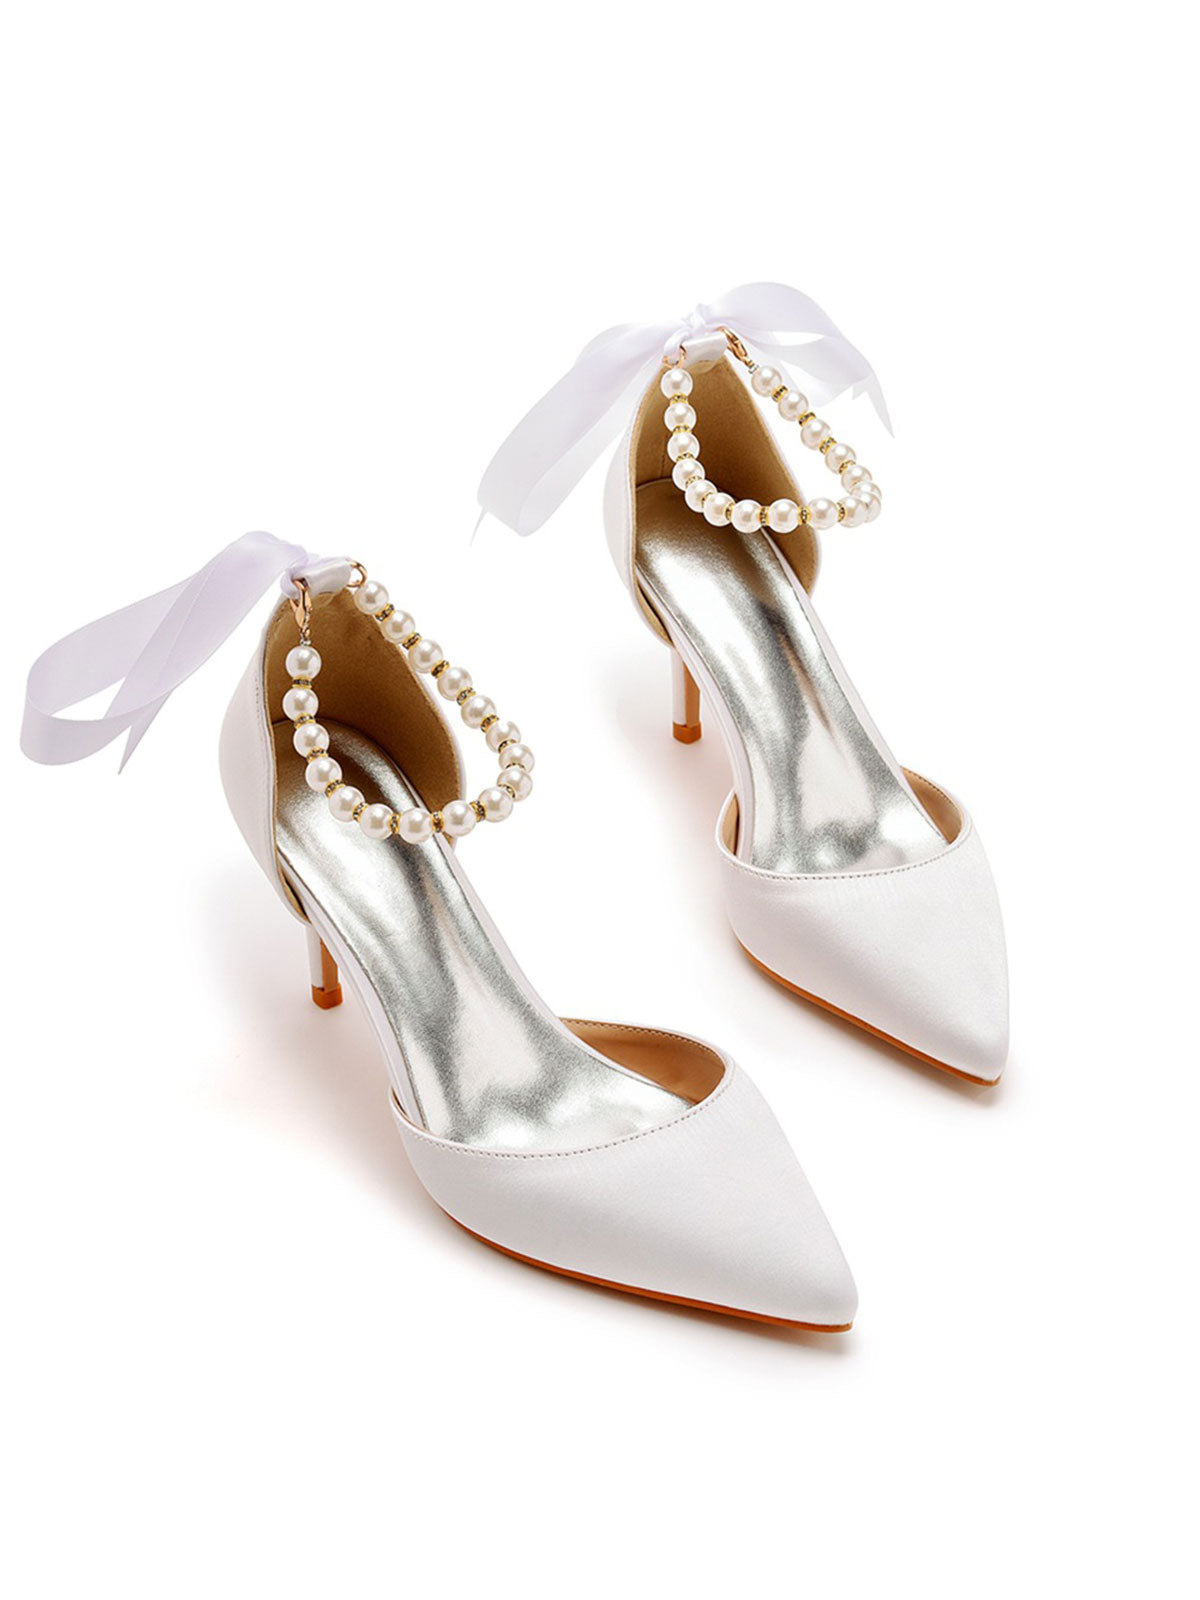 Pearl Ribbon Pointed Toe Ankle Strap Satin High Heels